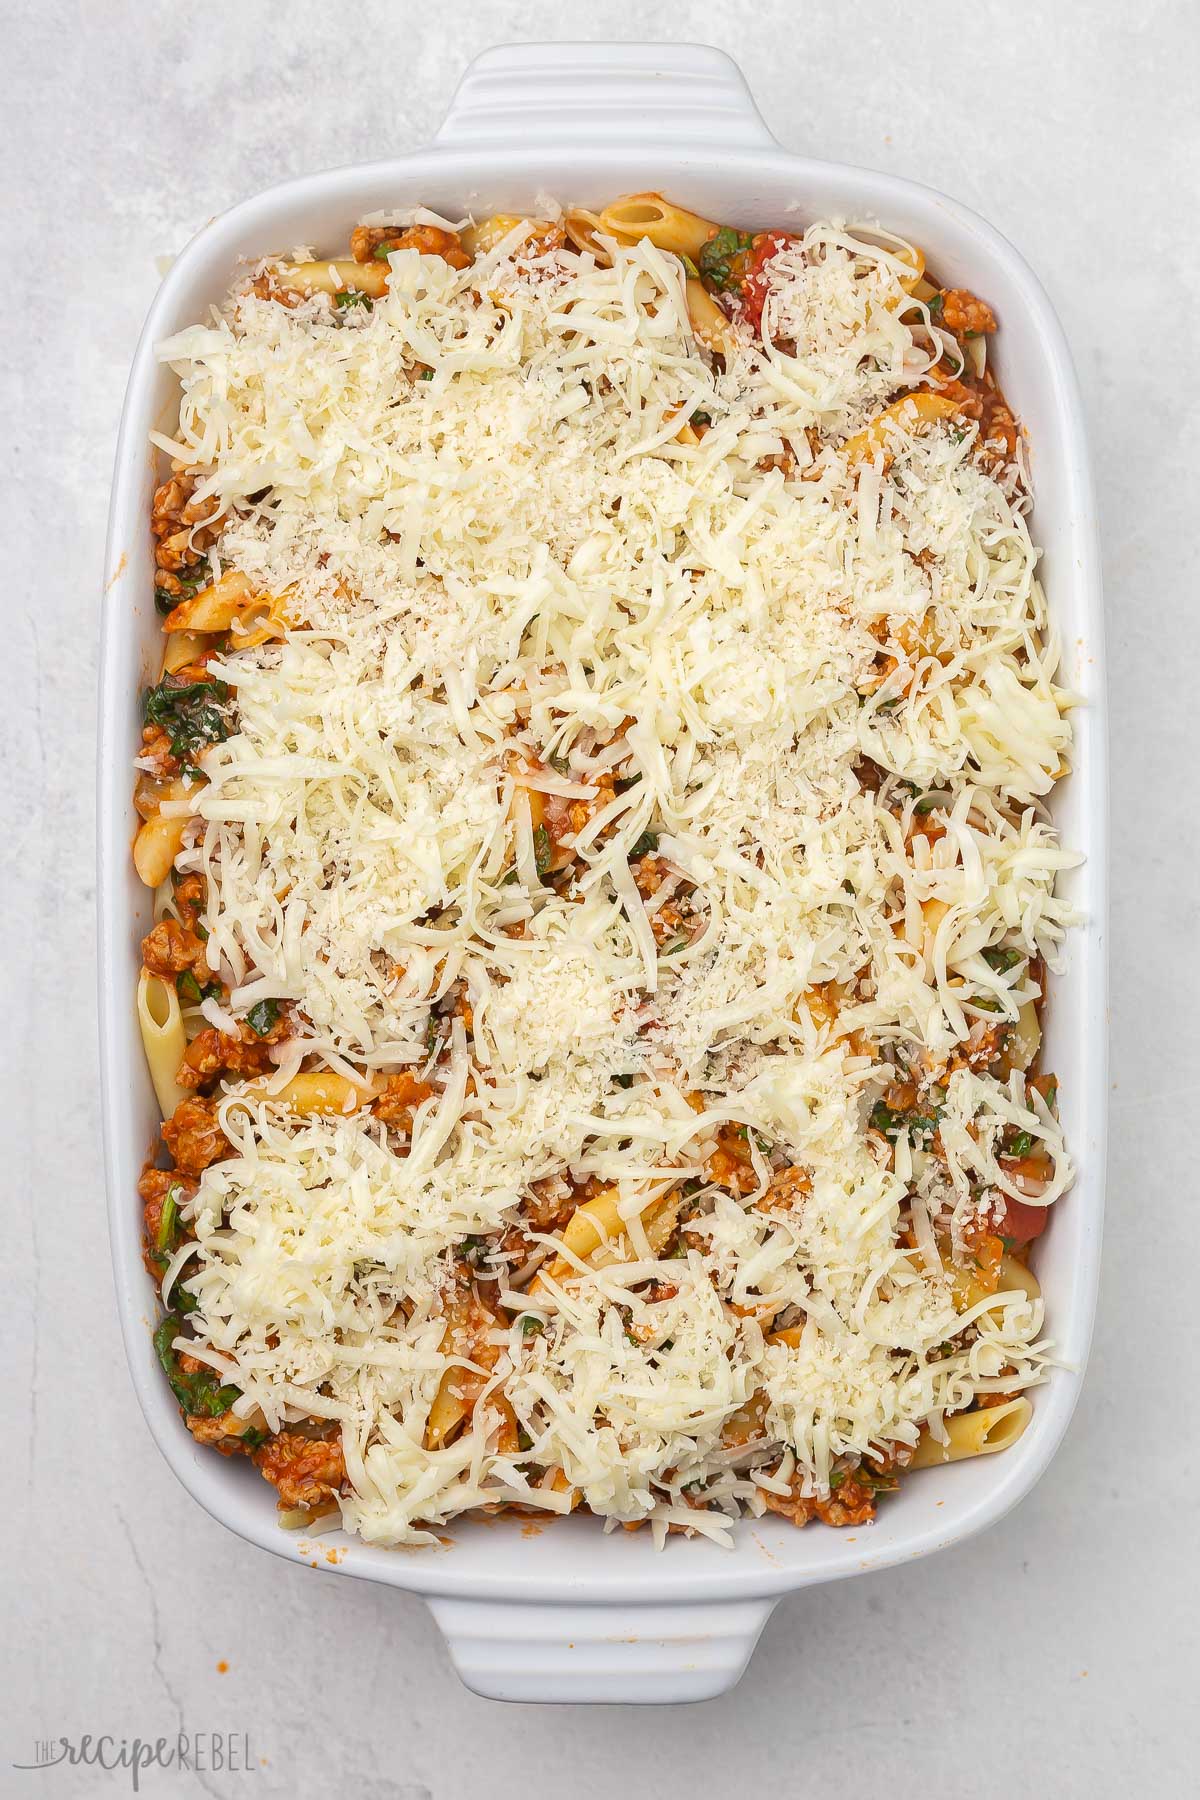 top view of baked mostaccioli pasta with shredded cheese on top.